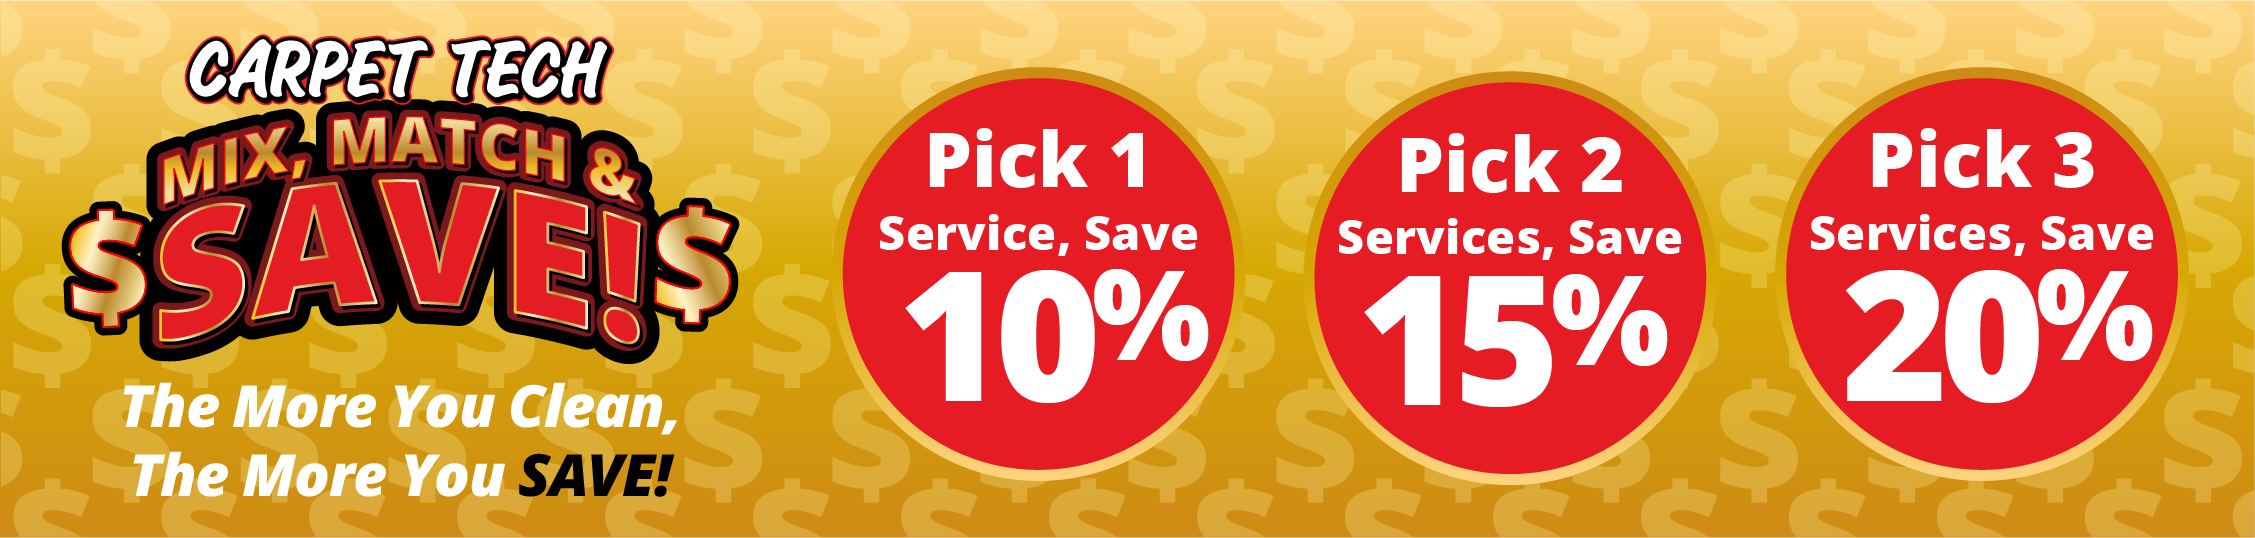 Mix, Match & Save - The more you clean, the more you save!